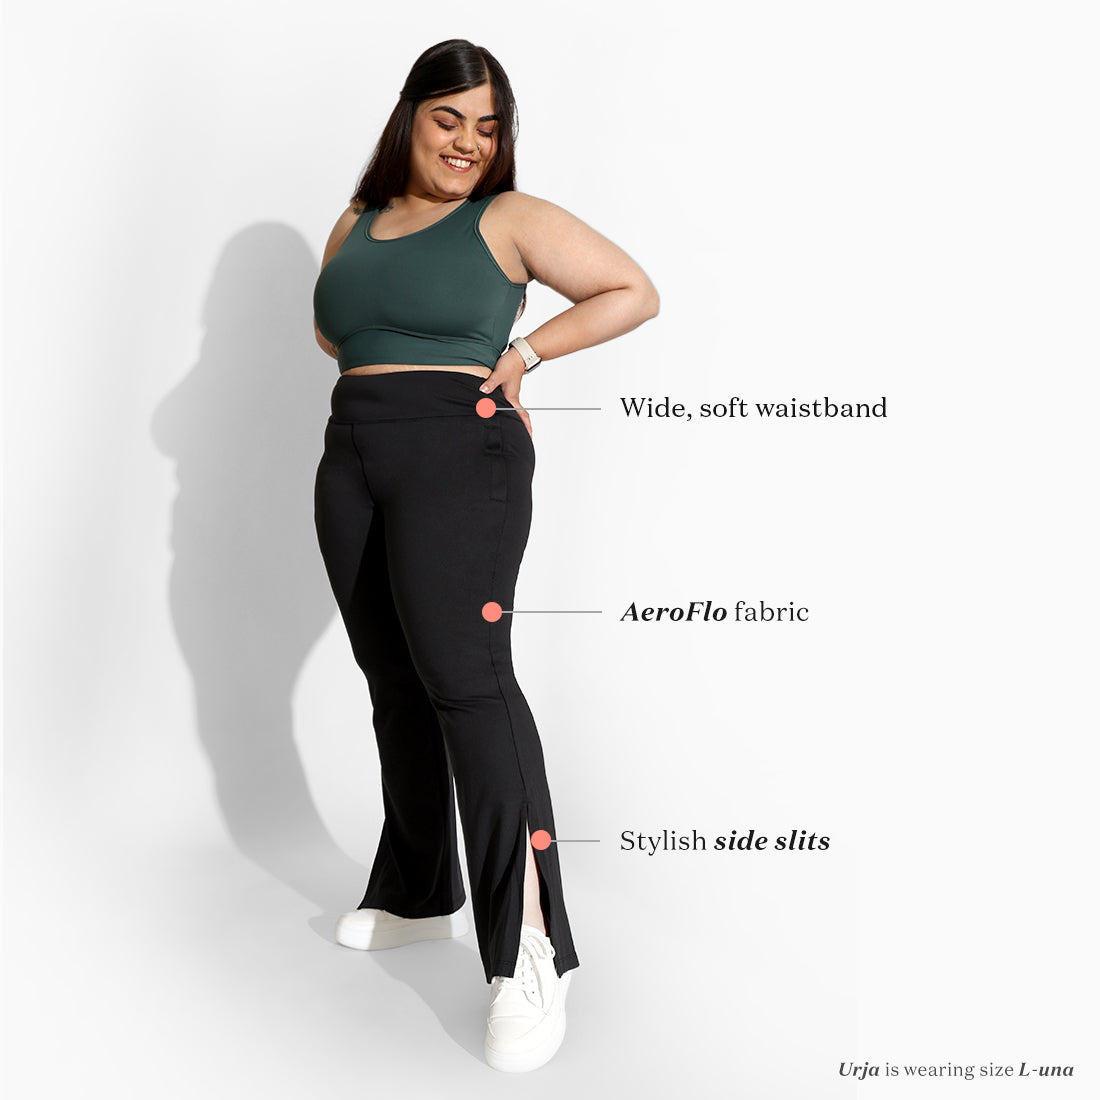 Say hello to Slit Flare Pants by #blissclub 😎 Link to sop in the